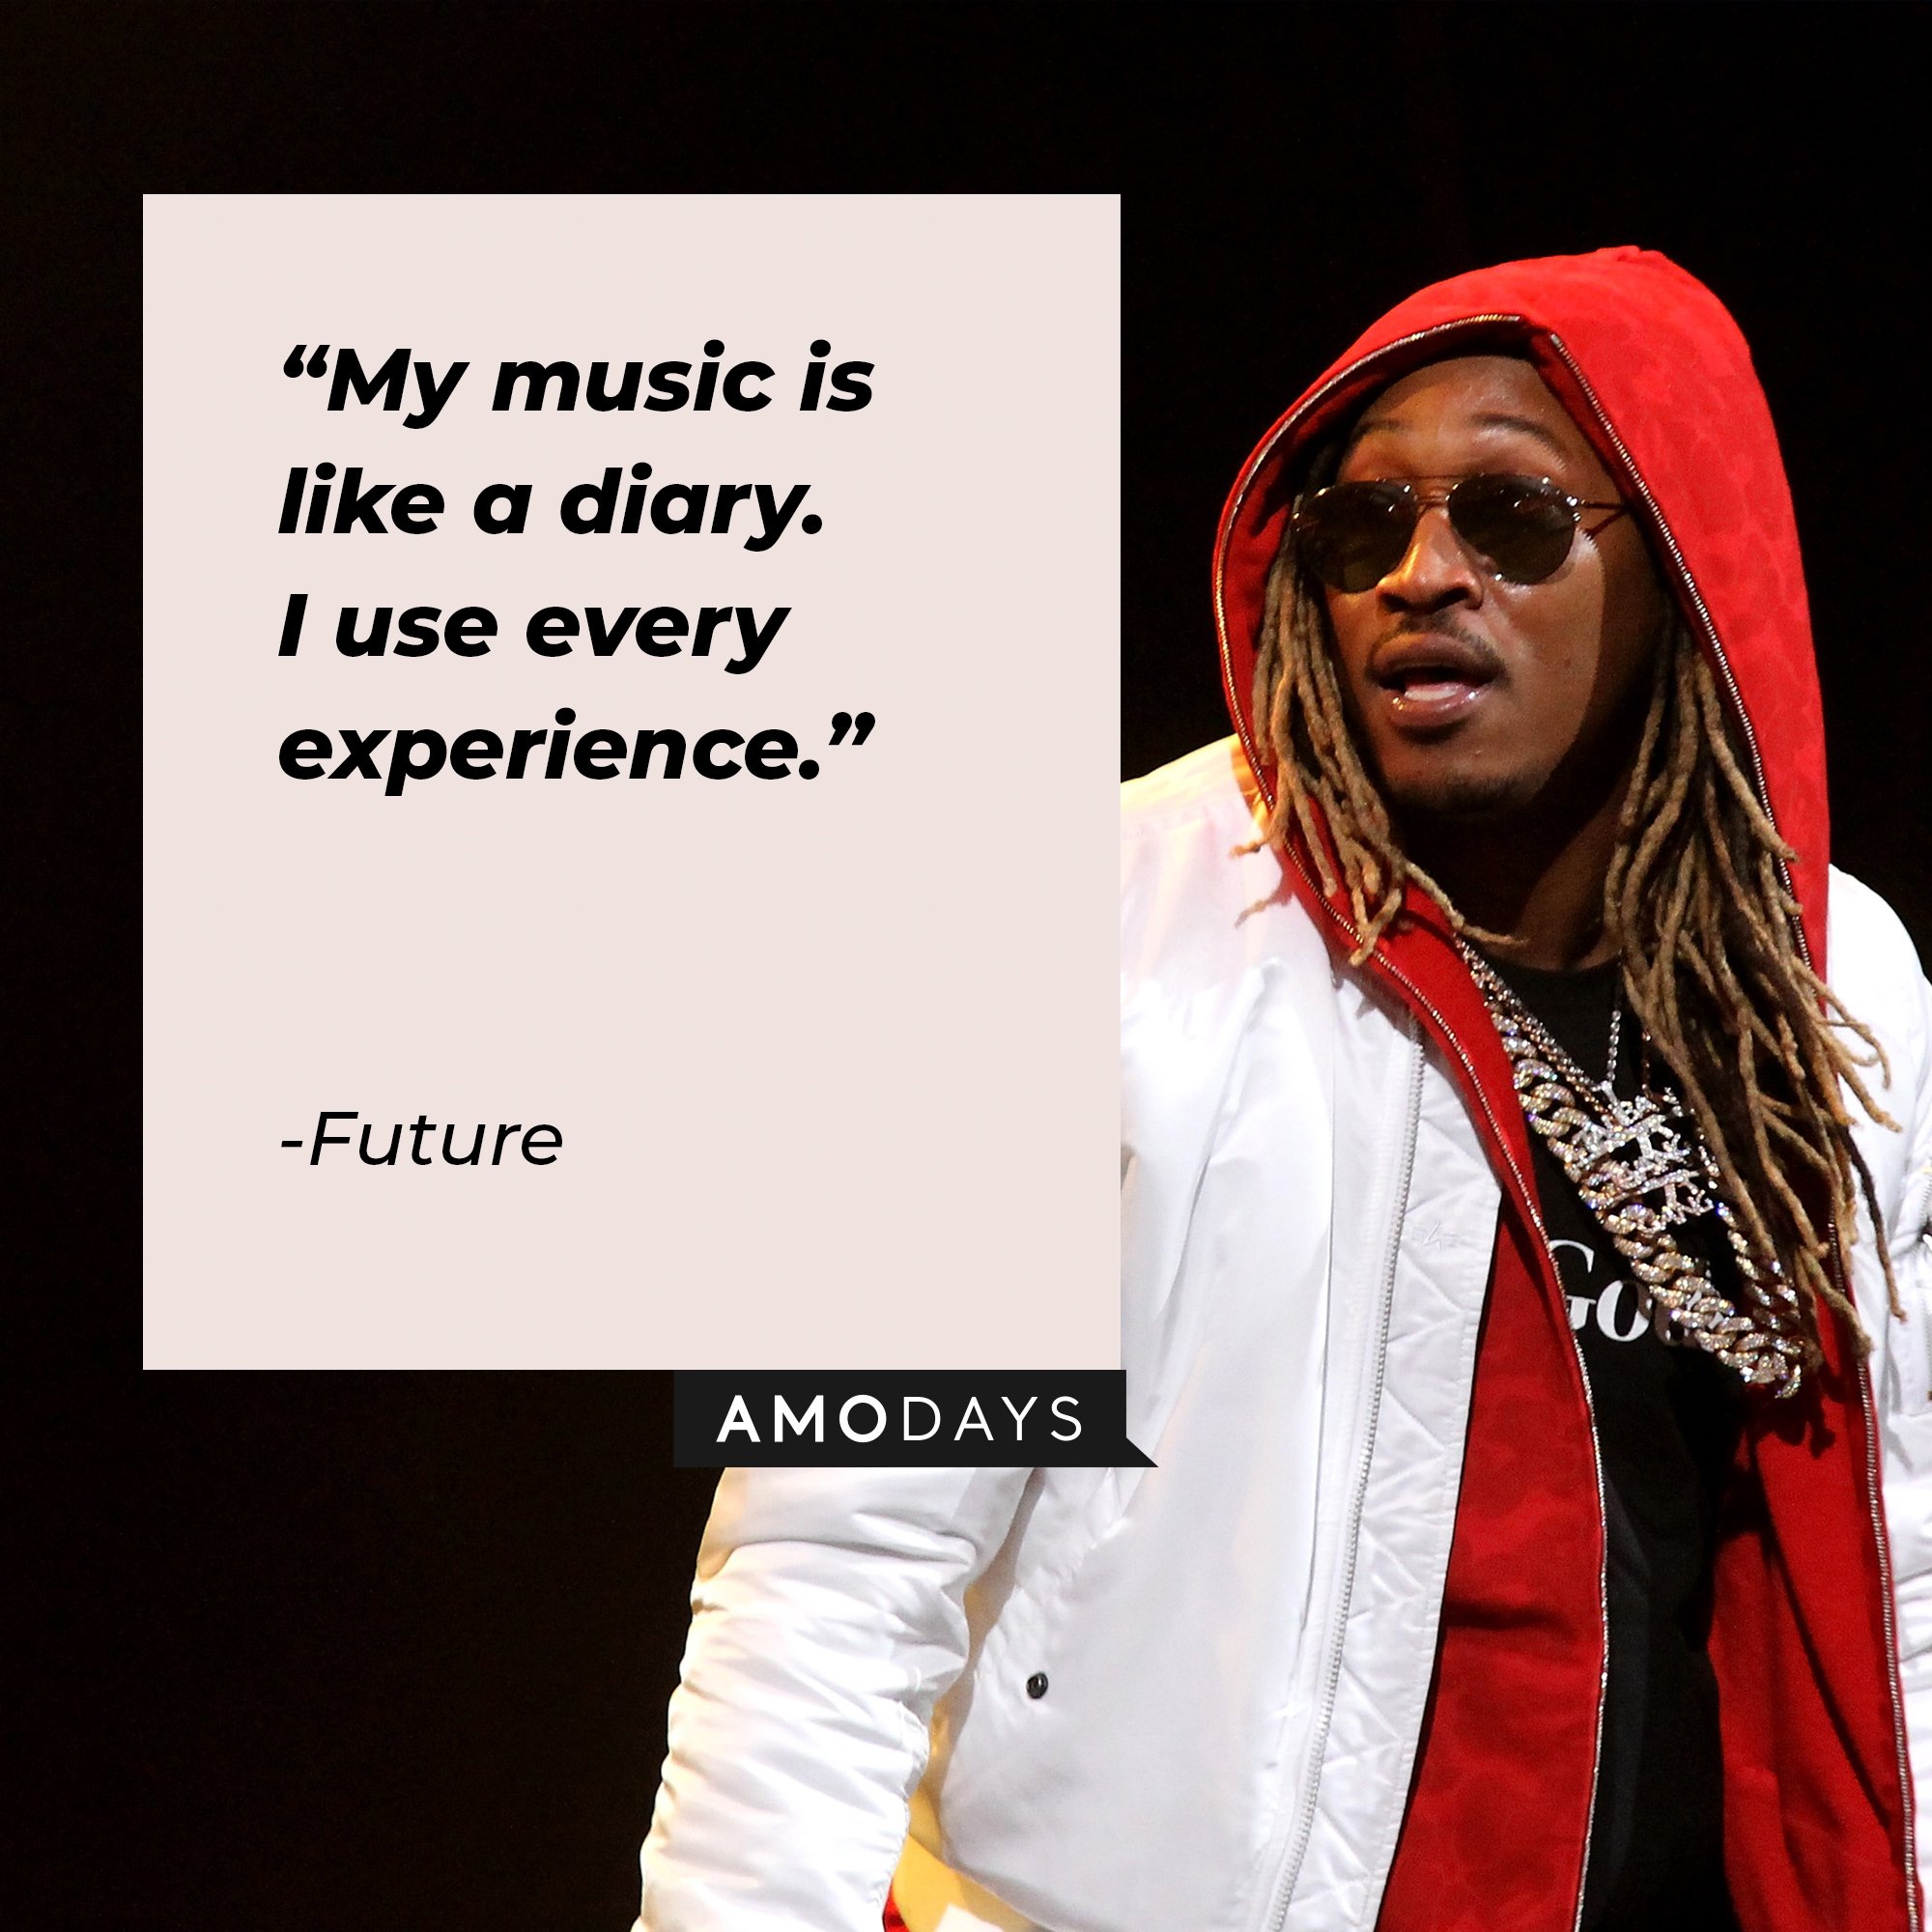 Future’s quote: "My music is like a diary. I use every experience.” | Image: AmoDays